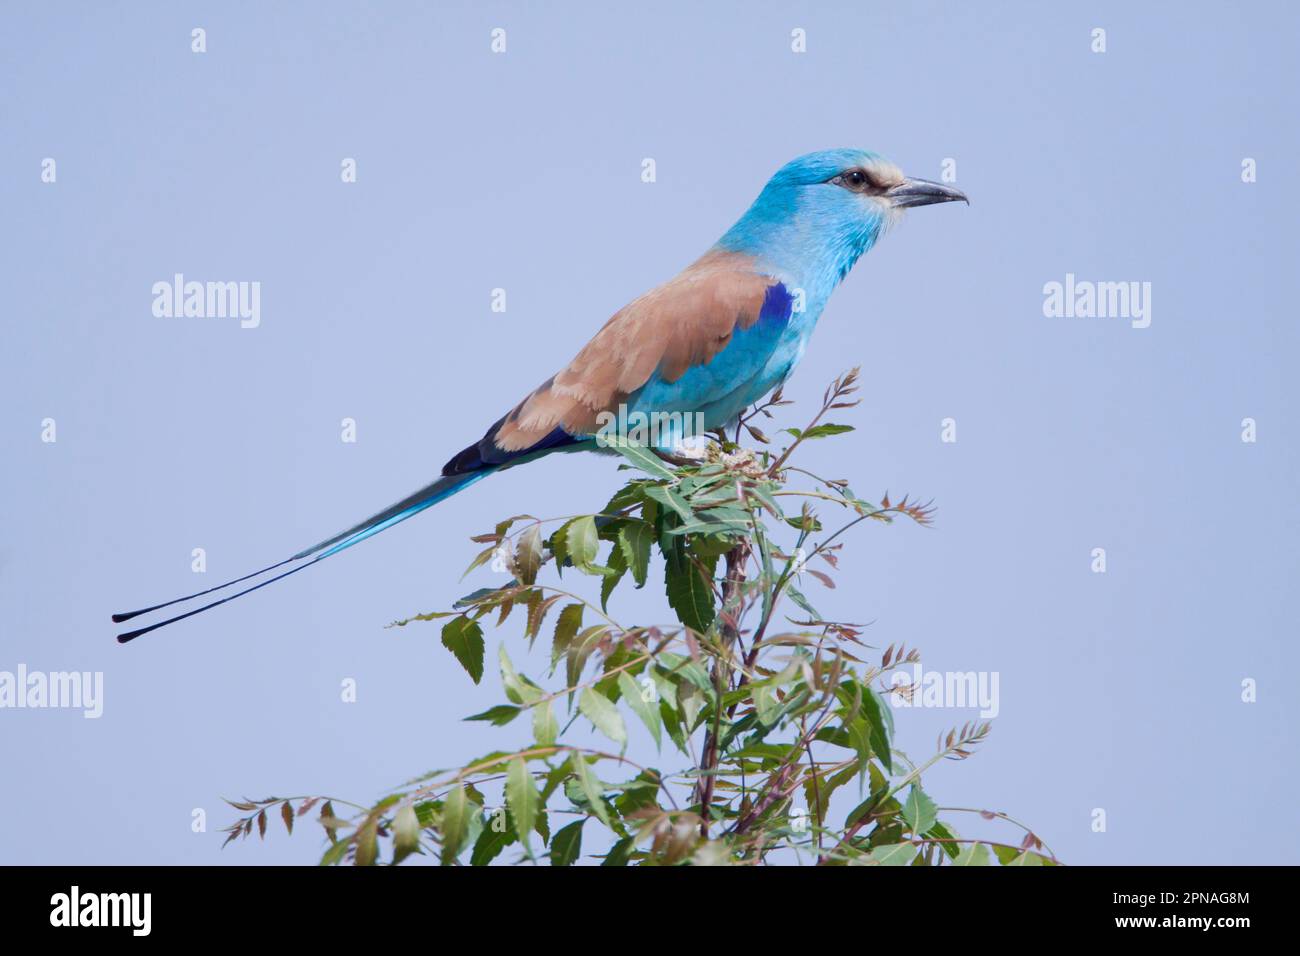 Adult abyssinian roller (Coracias abyssinica), sitting on a branch, Gambia Stock Photo